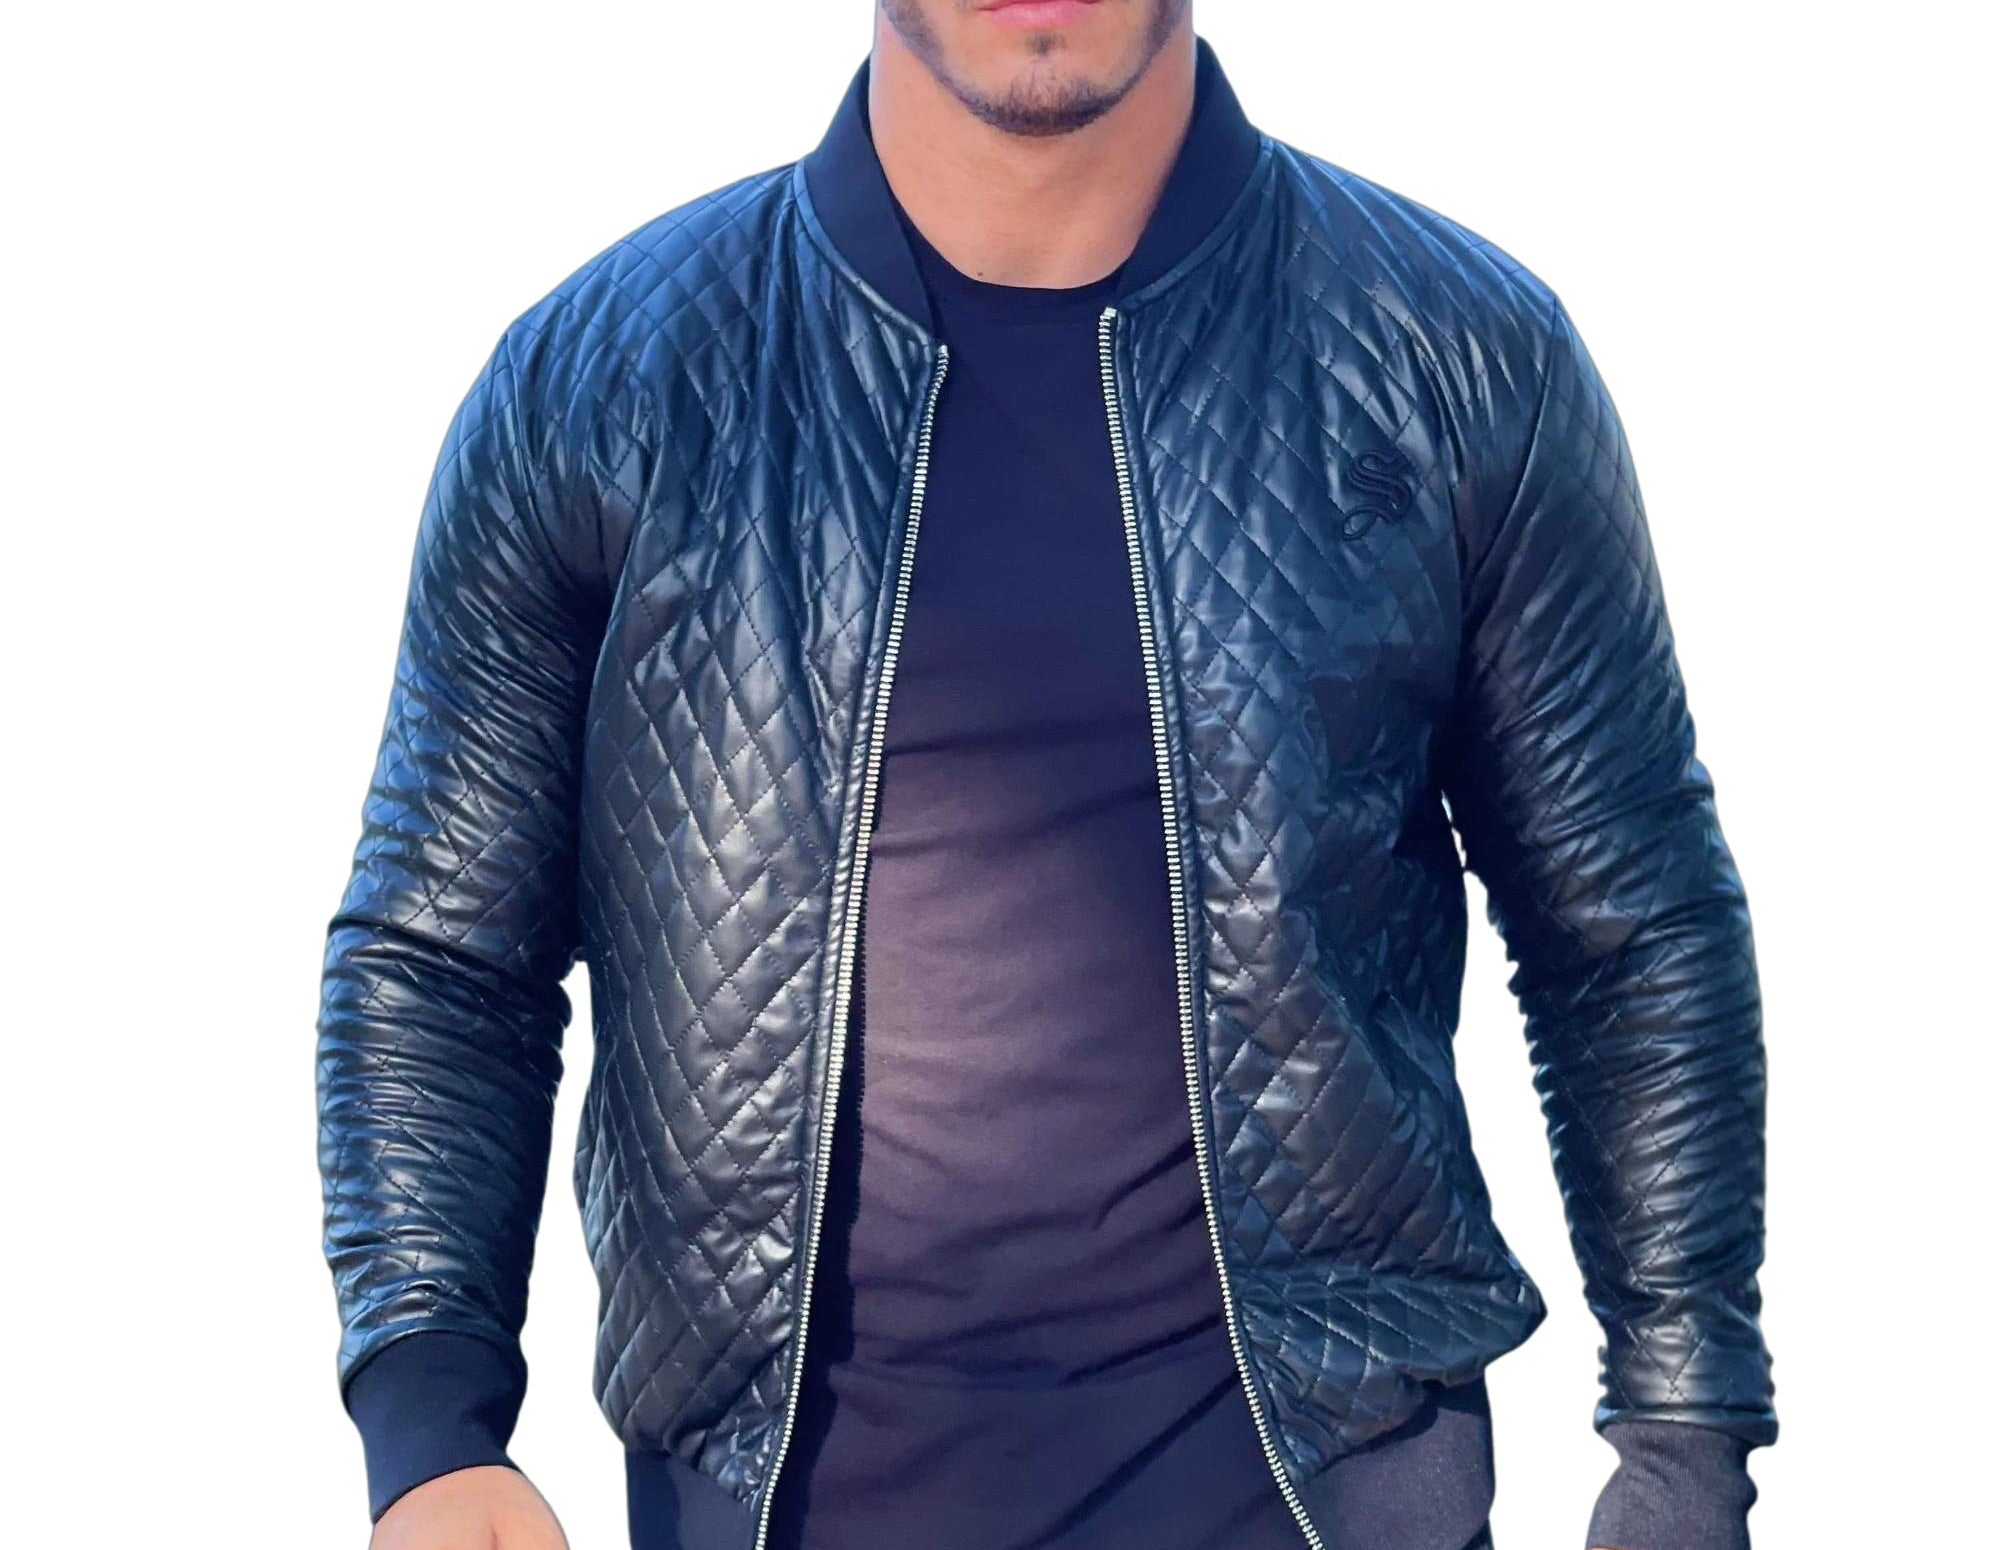 Chester - Black Jacket for Men (PRE-ORDER DISPATCH DATE 1 JULY 2022) - Sarman Fashion - Wholesale Clothing Fashion Brand for Men from Canada